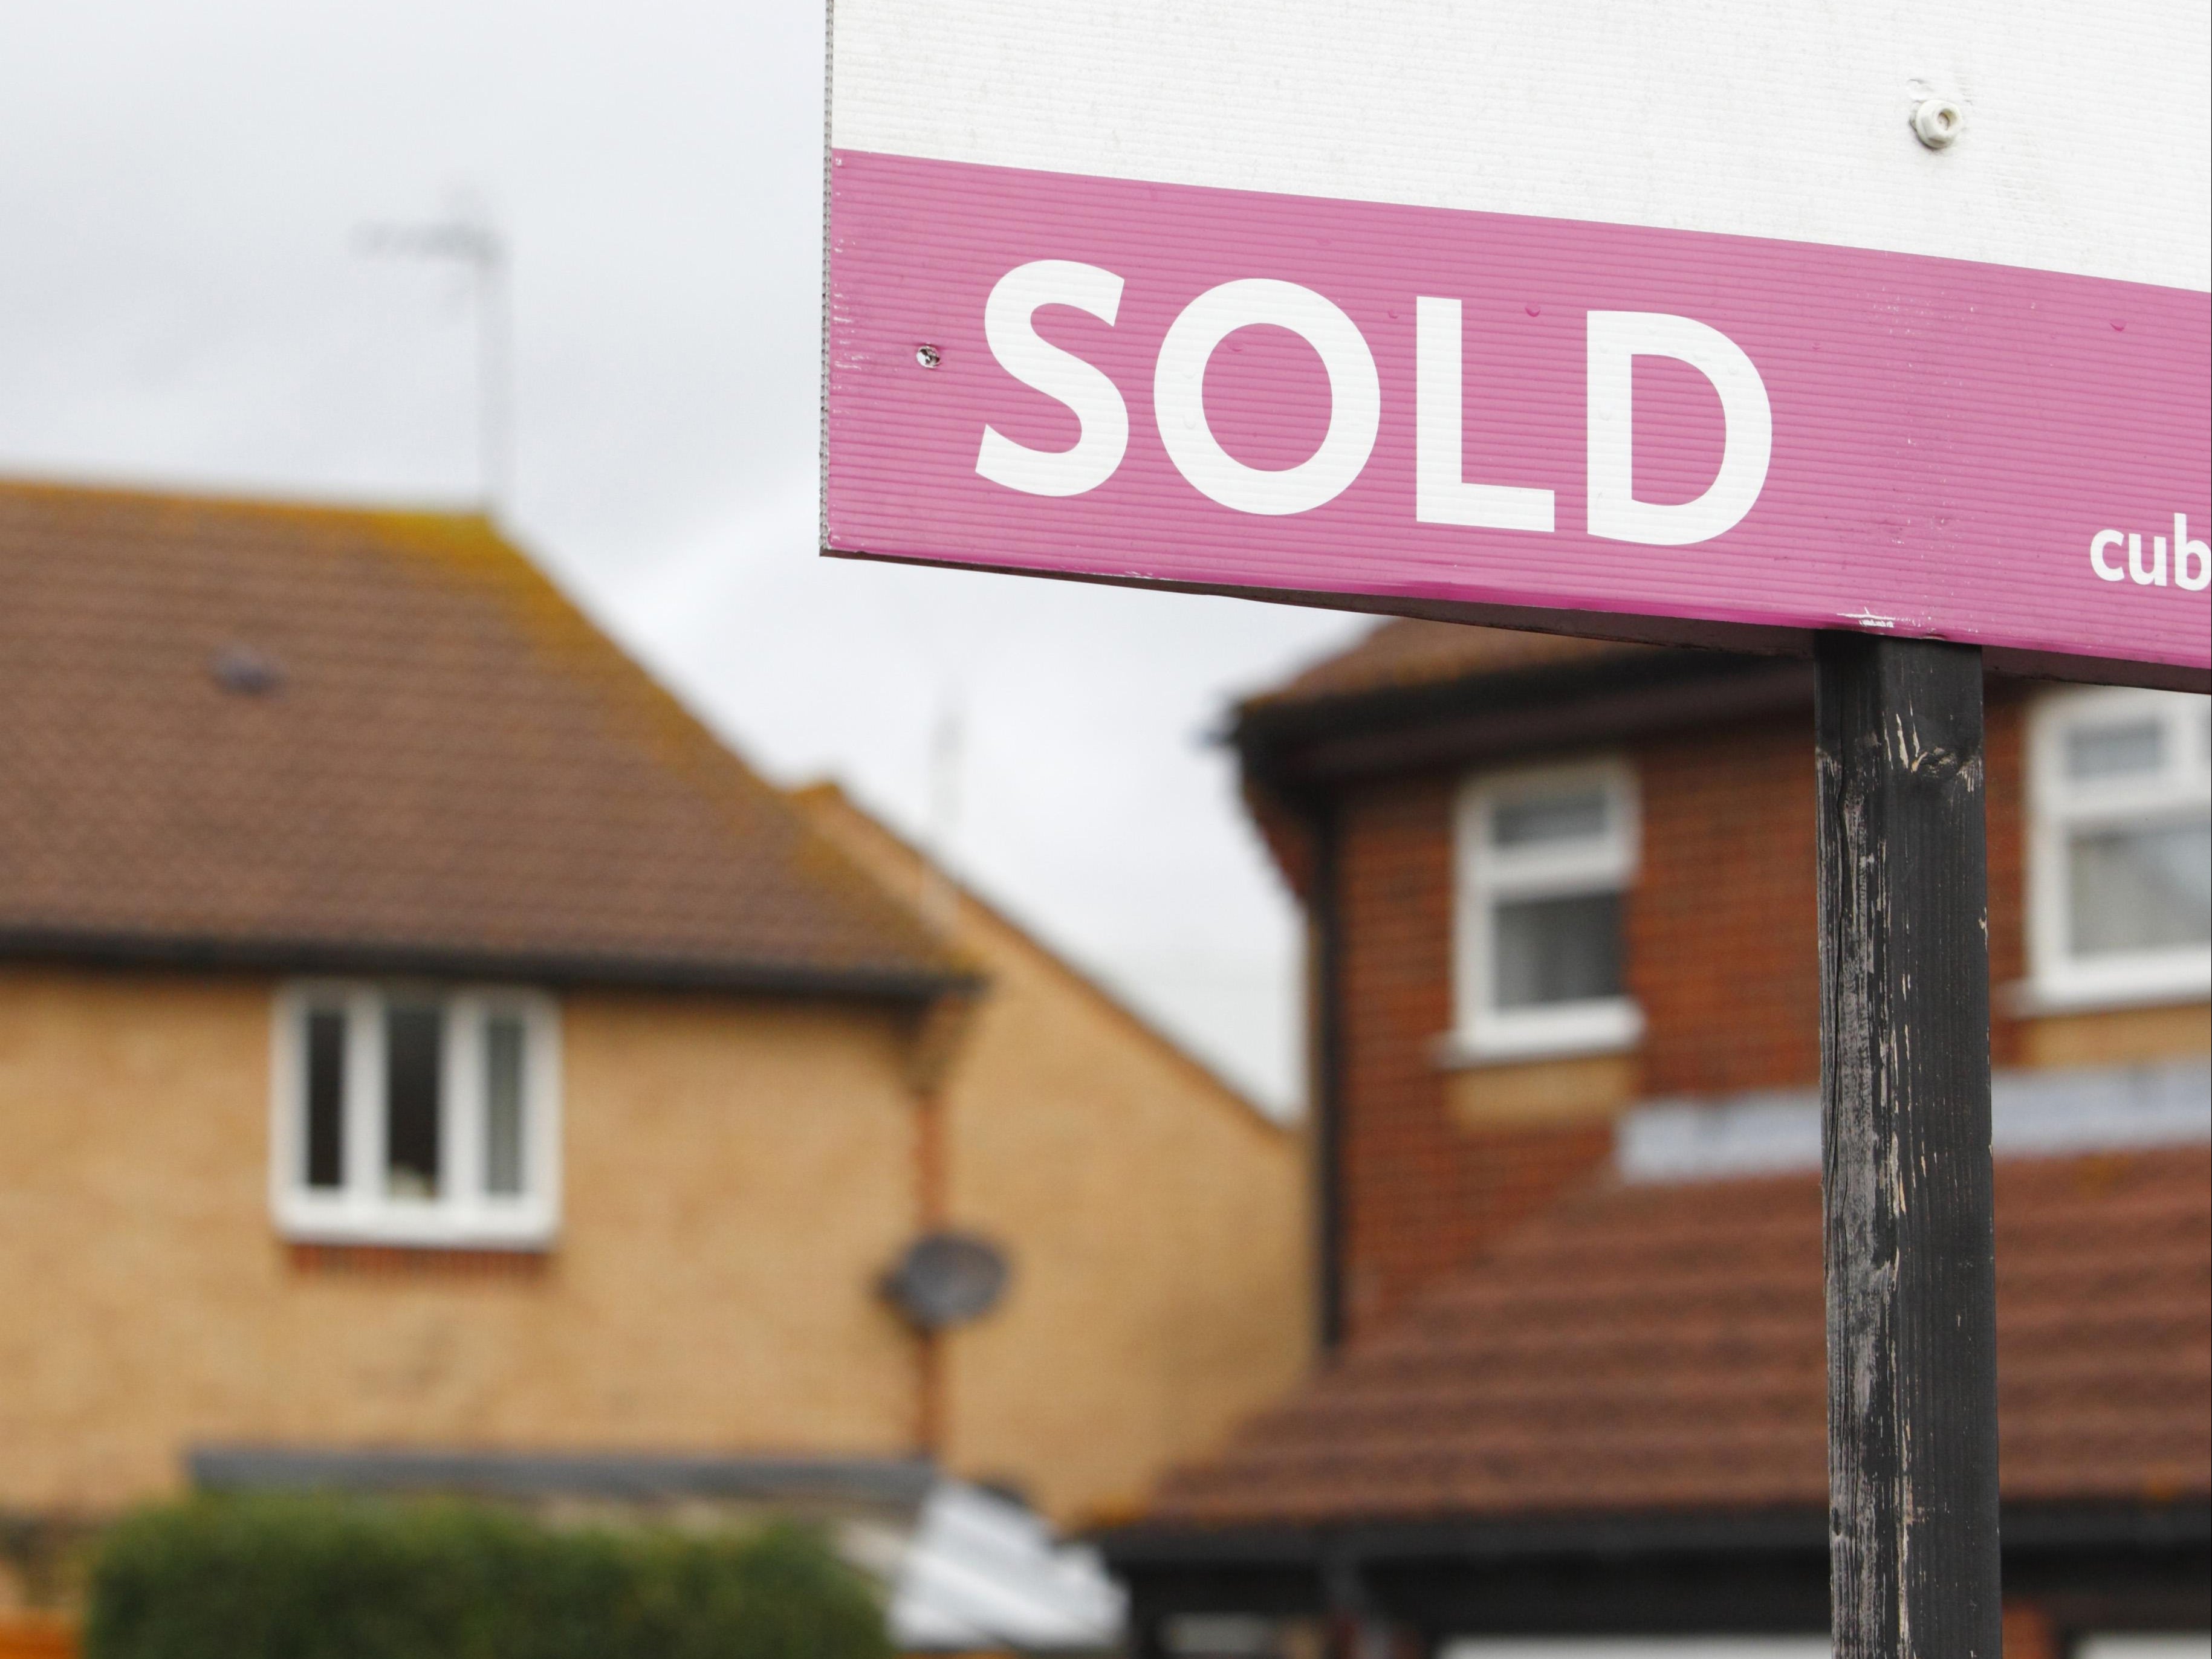 Several housing market reports have pointed to a mini-boom as the housing market has reopened for business - and those behind the new research said the push for larger properties as buyers search for more space appears to be driving this growth